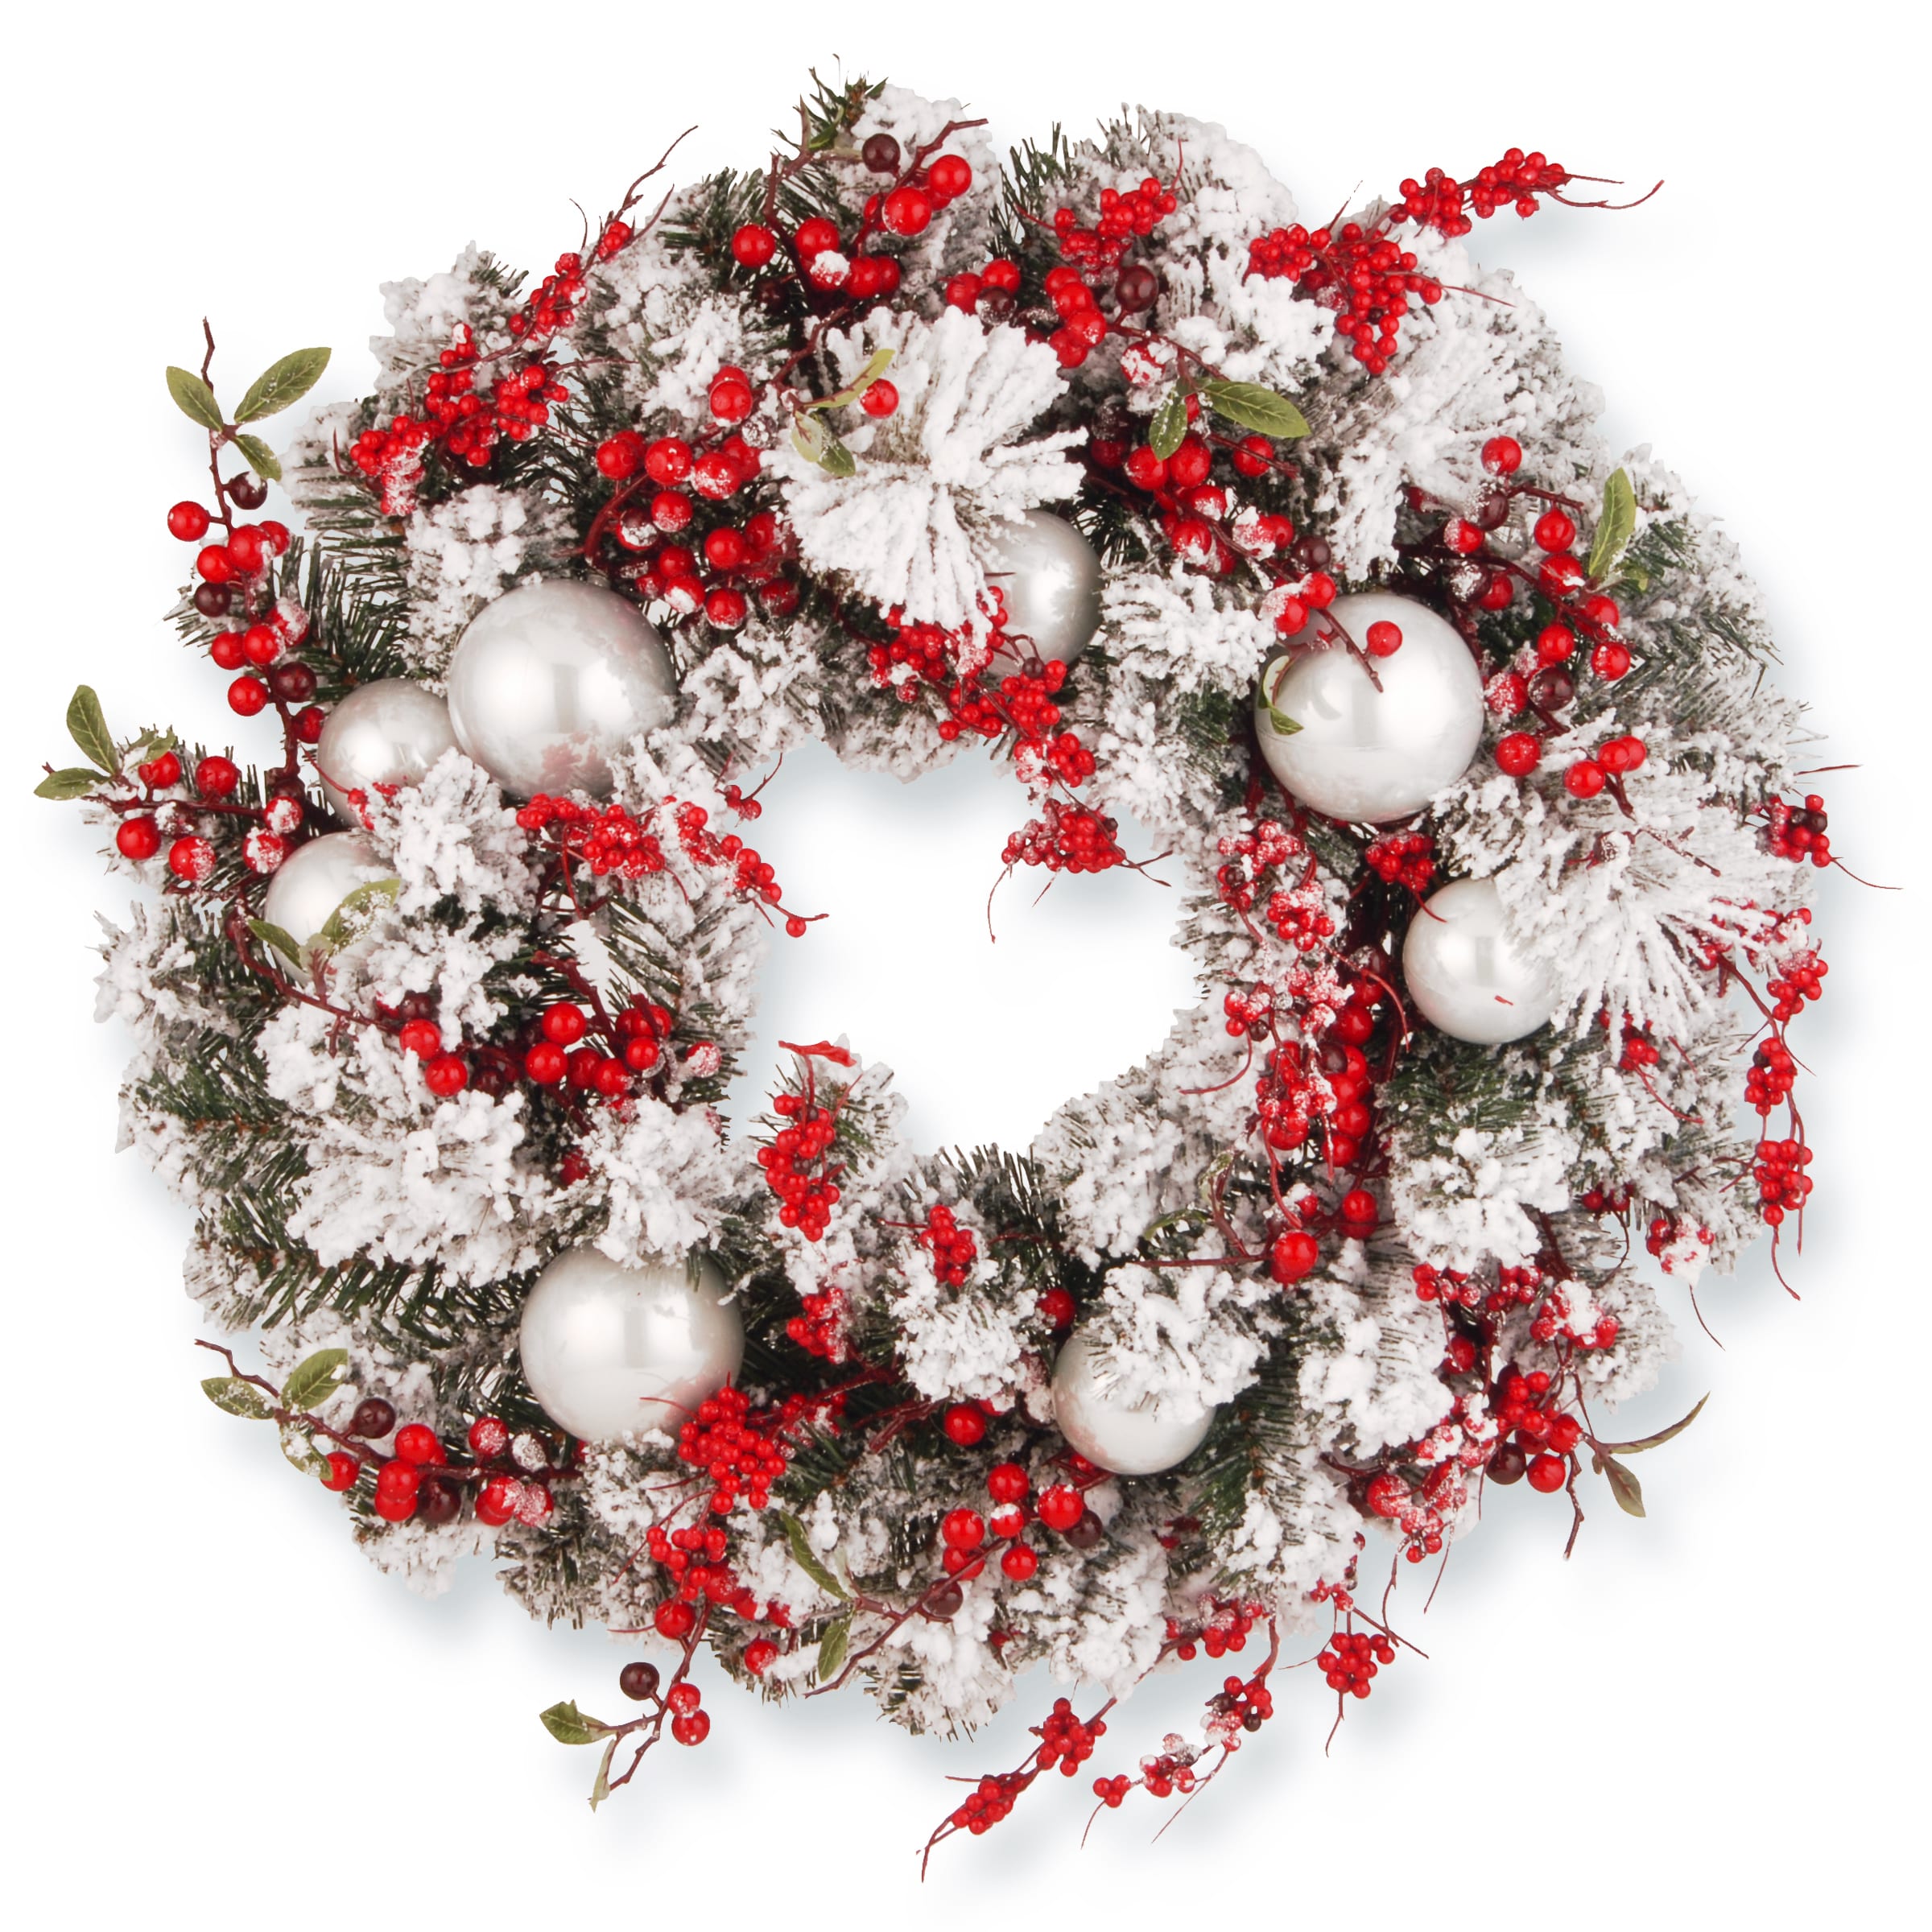 Red and White 24-inch Artificial Ornament Christmas Wreath - 24